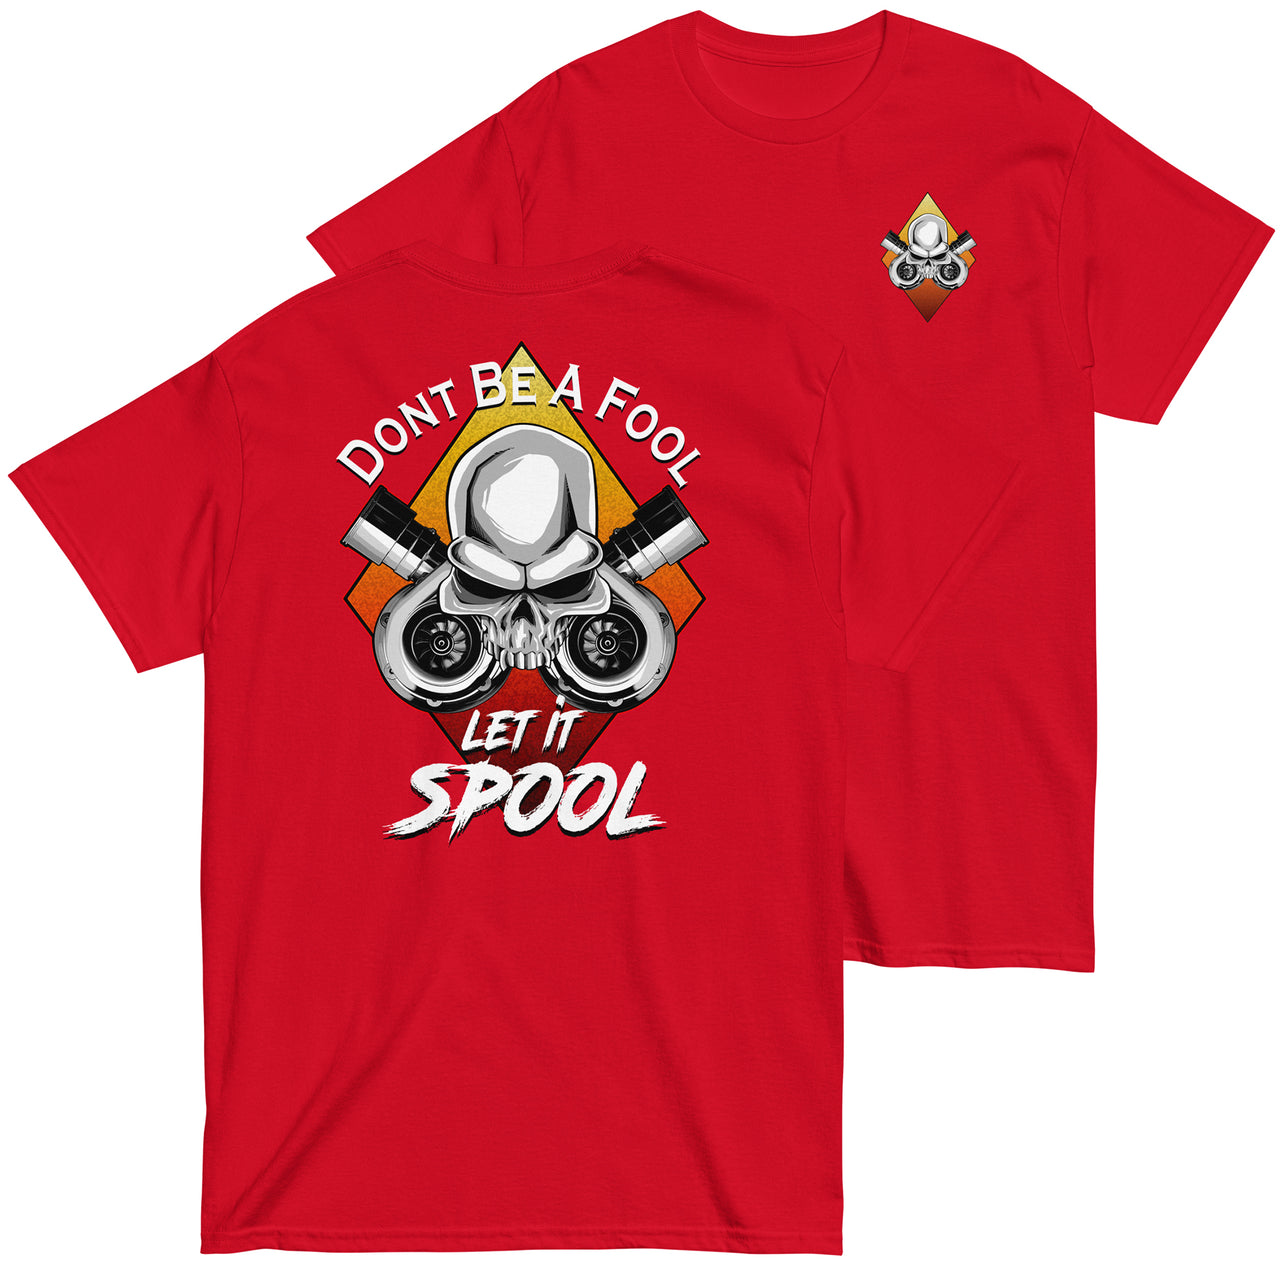 Dont Be A Fool - Spool Turbo T-Shirt in red